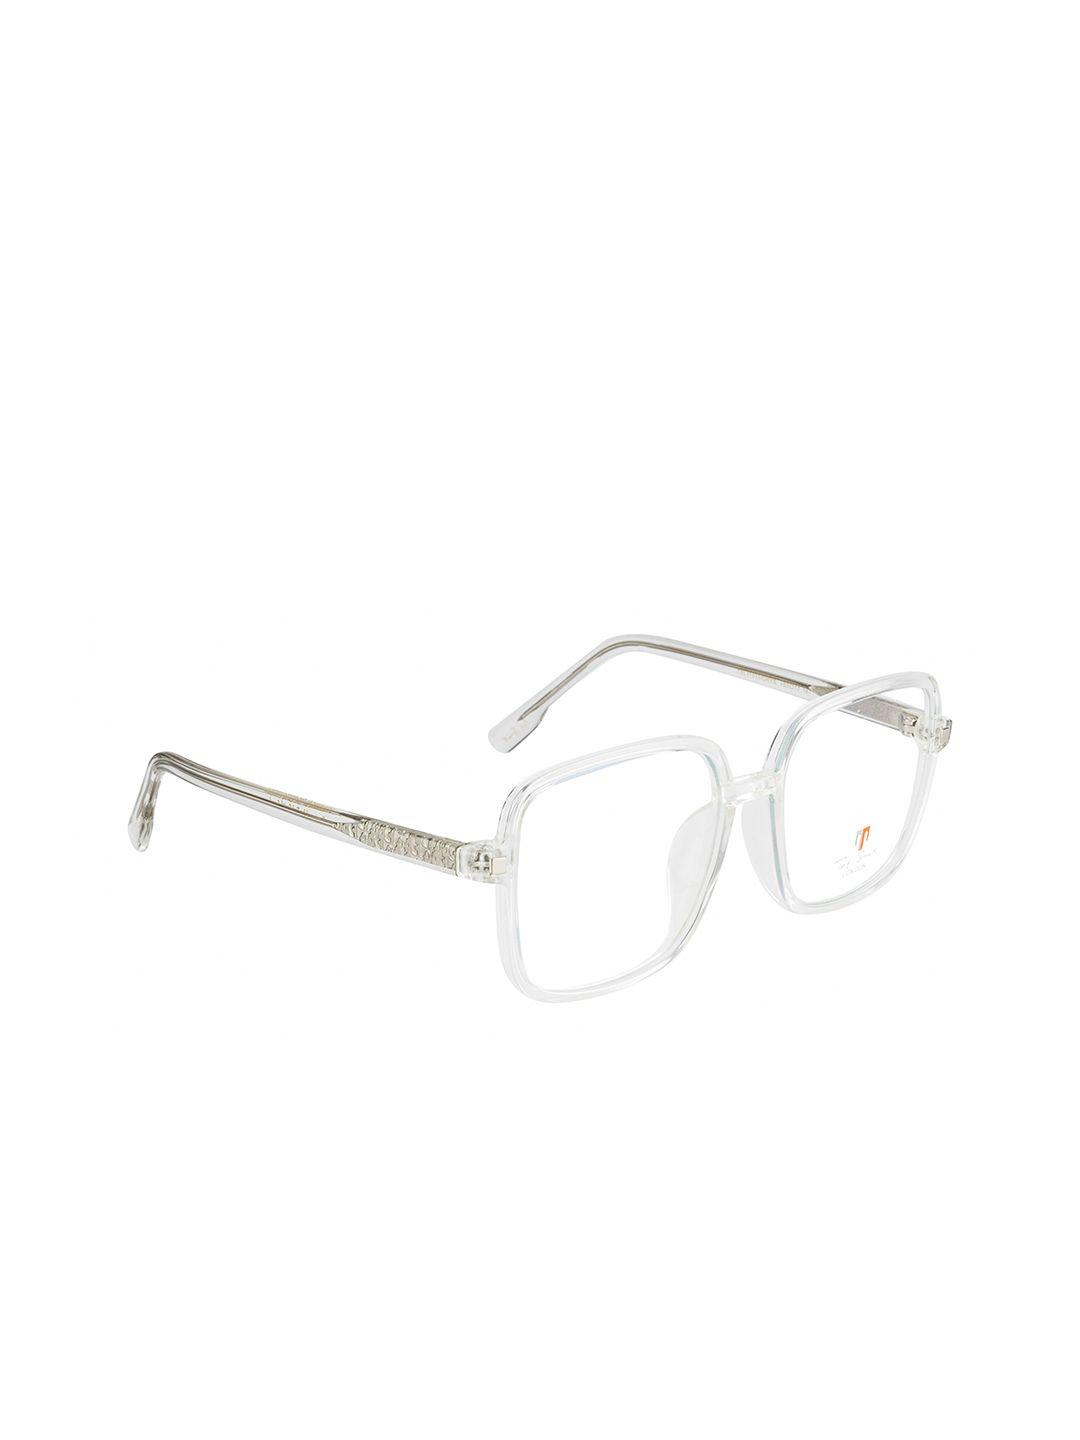 ted smith transparent & silver full rim square frames ts-11011_cry-transparent